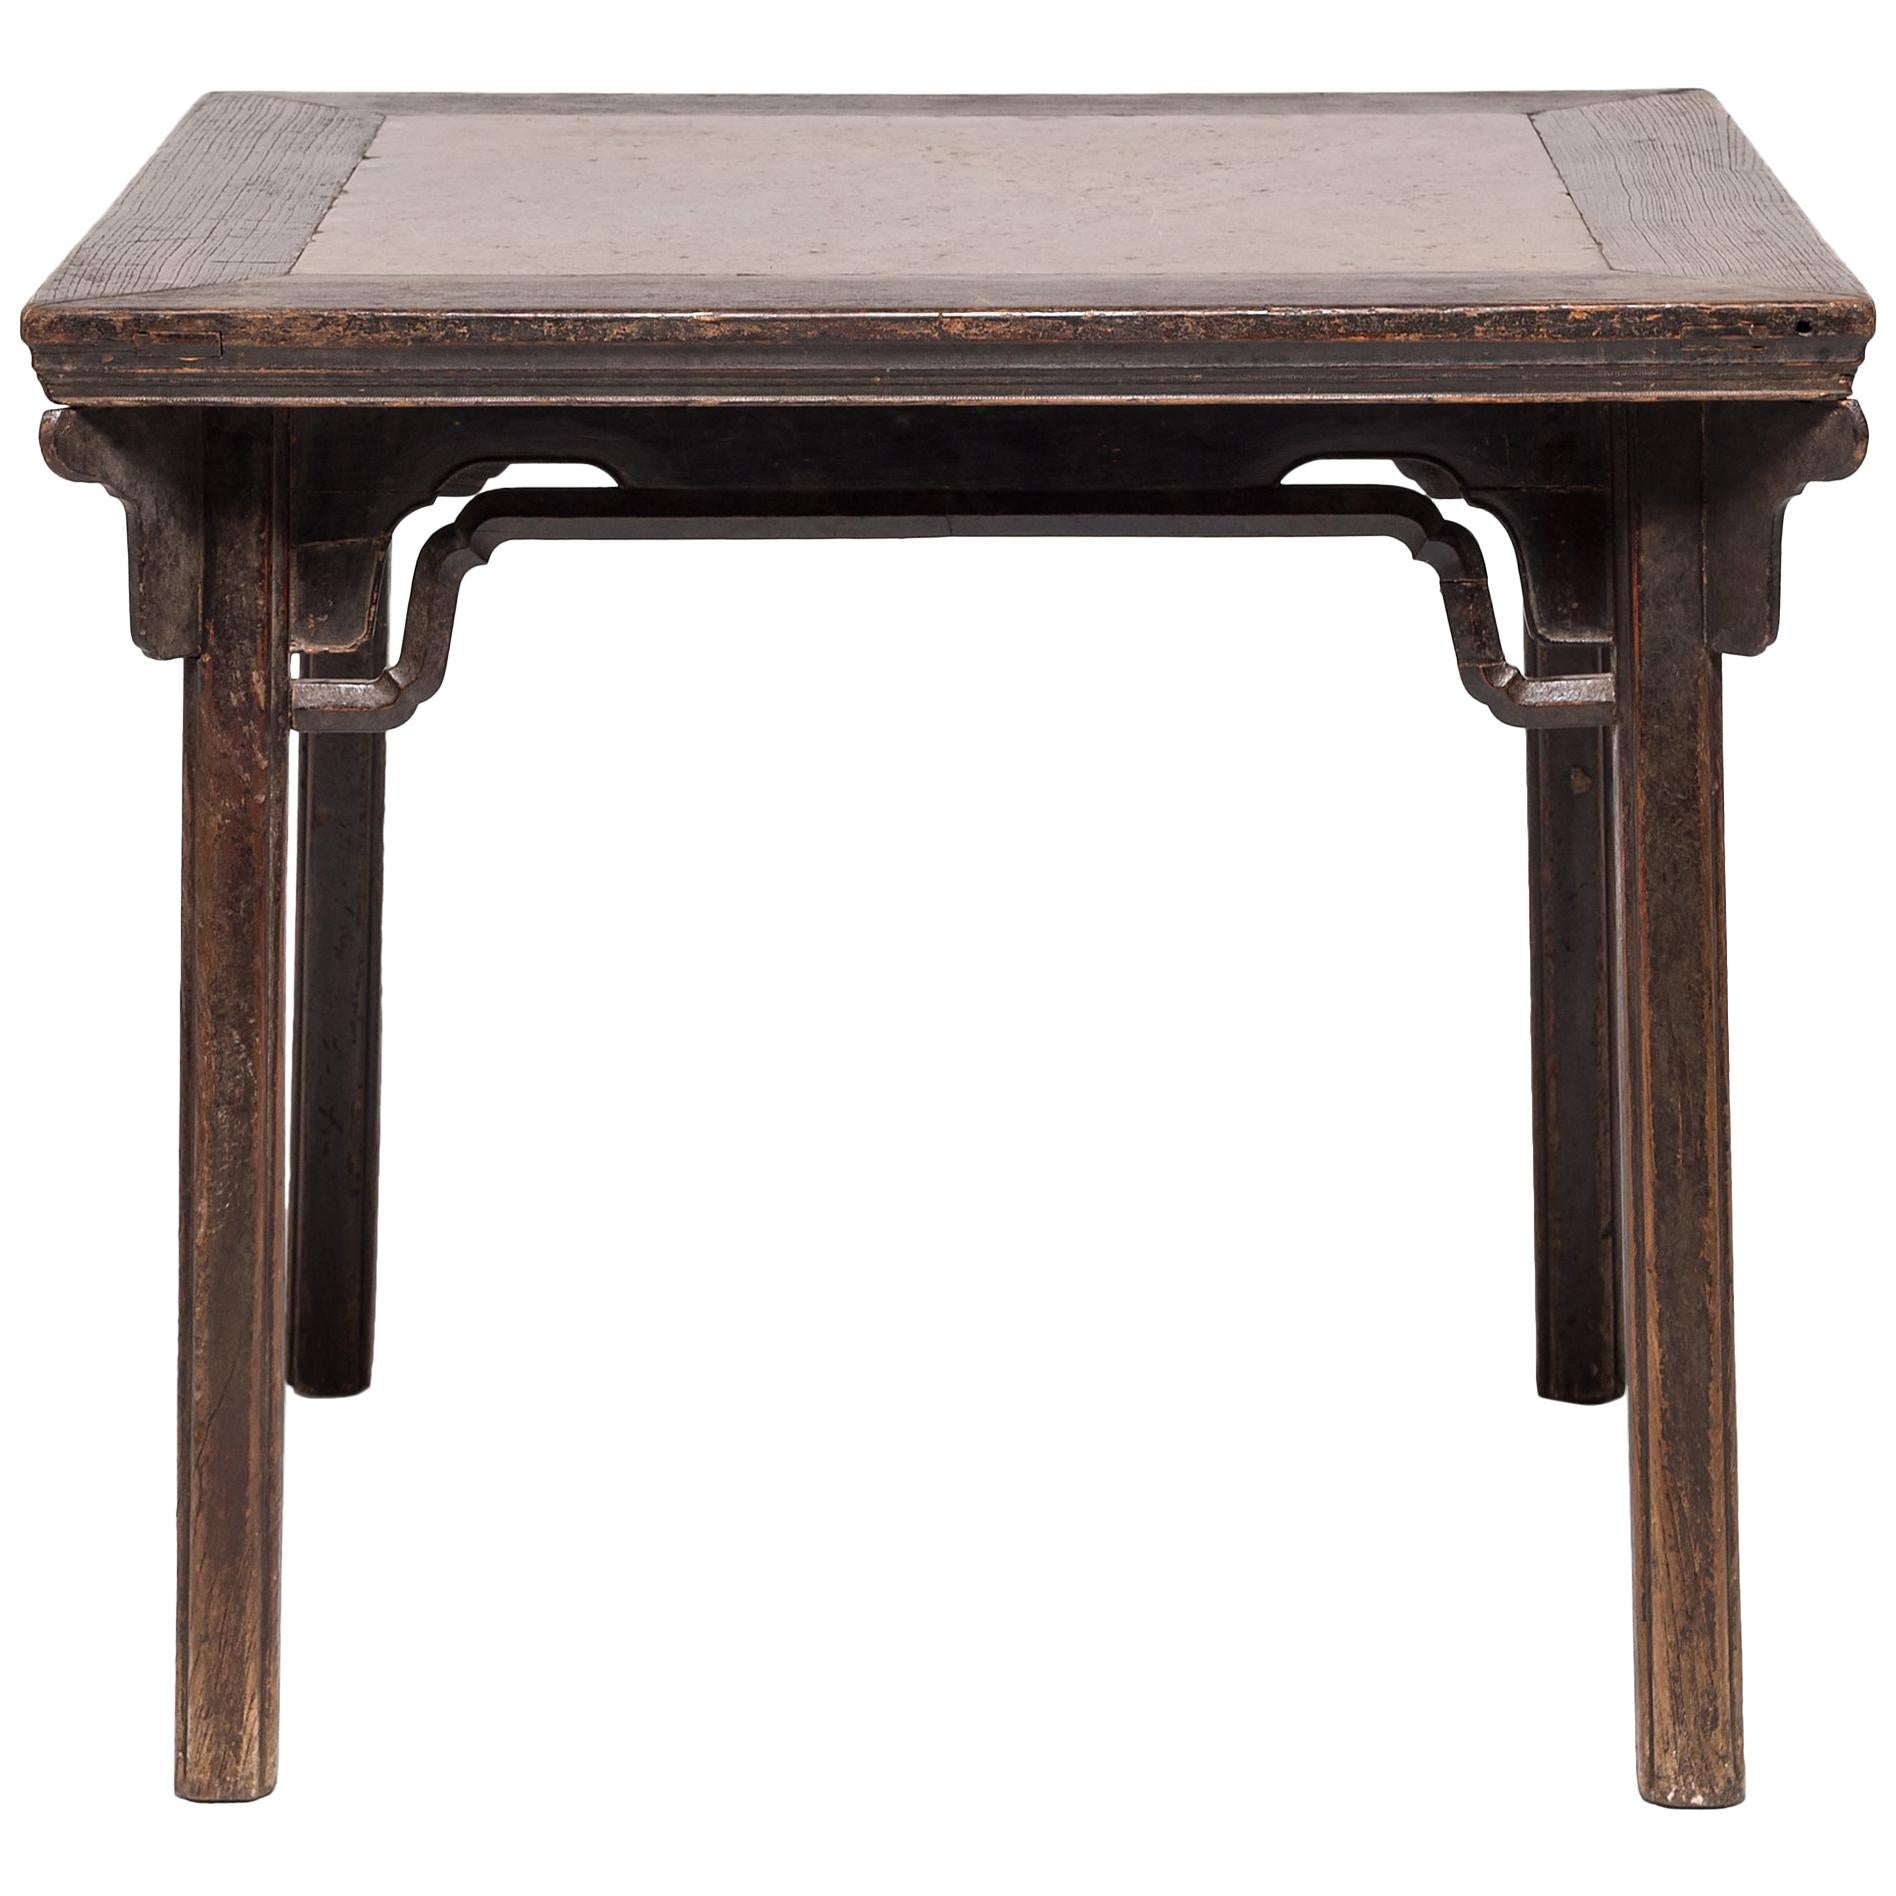 Eight Immortals Square Table with Puddingstone Inlay